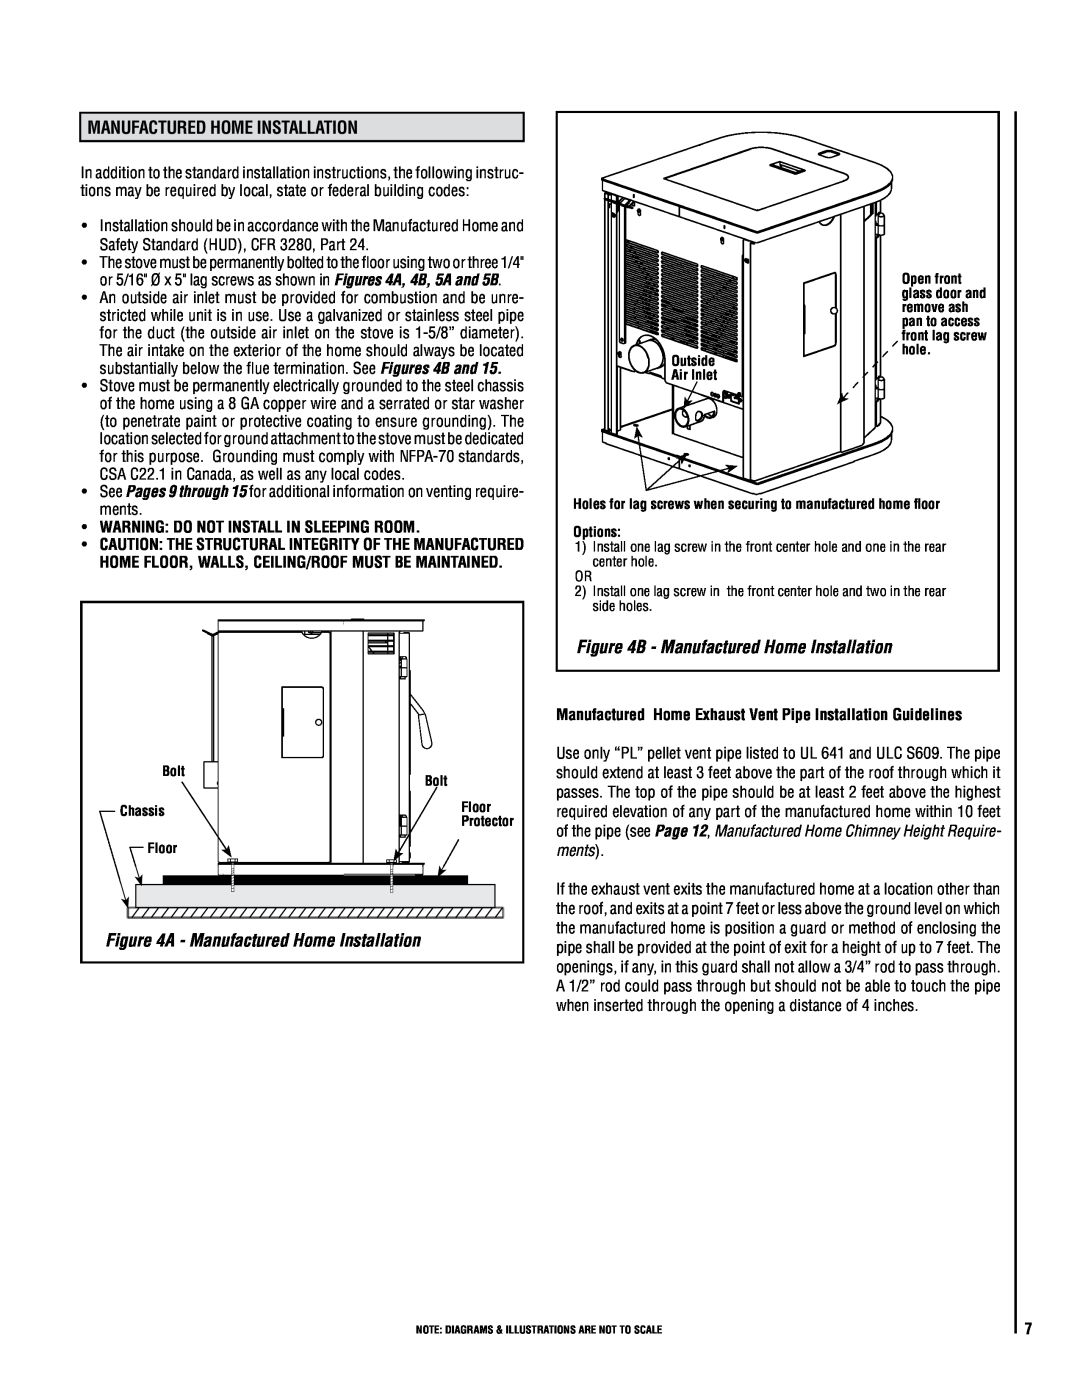 Lennox Hearth 32FS operation manual B - Manufactured Home Installation, Warning Do Not Install In Sleeping Room 